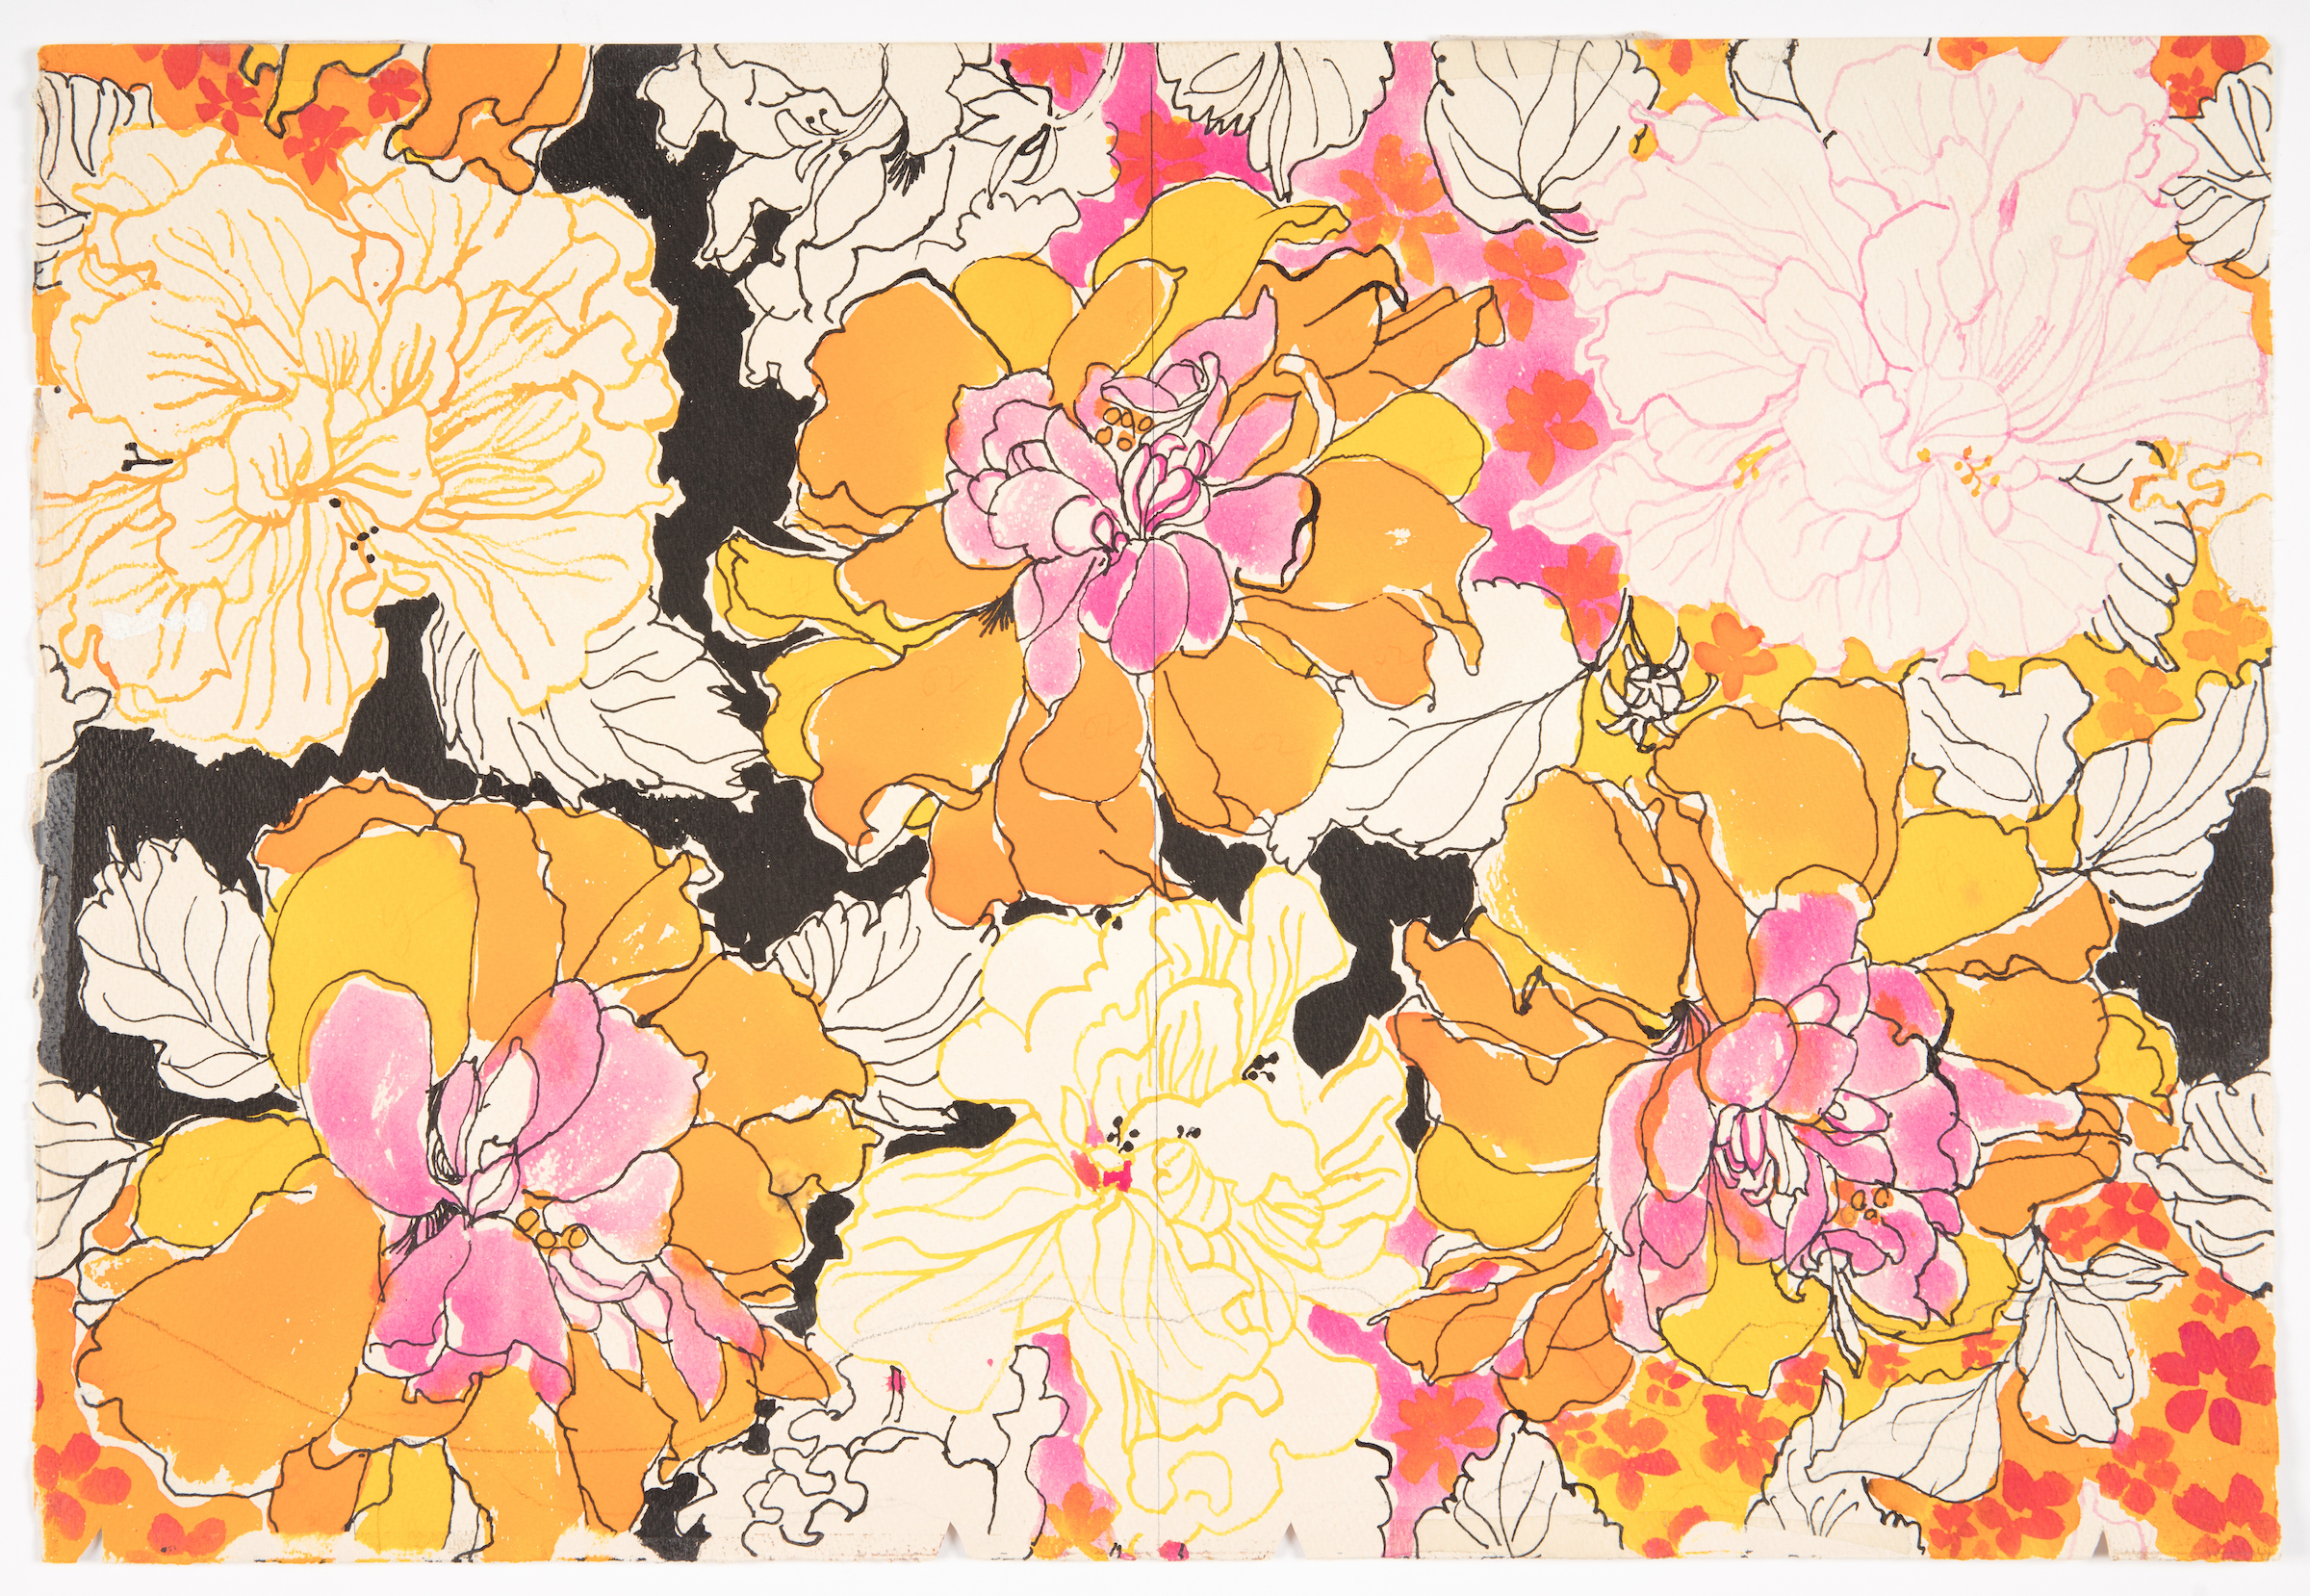 A watercolor and ink image of large-scale florals, in yellow, orange, red, and pink by Zuzek. The flowers are delicately outlined in black pen, and against a black background.